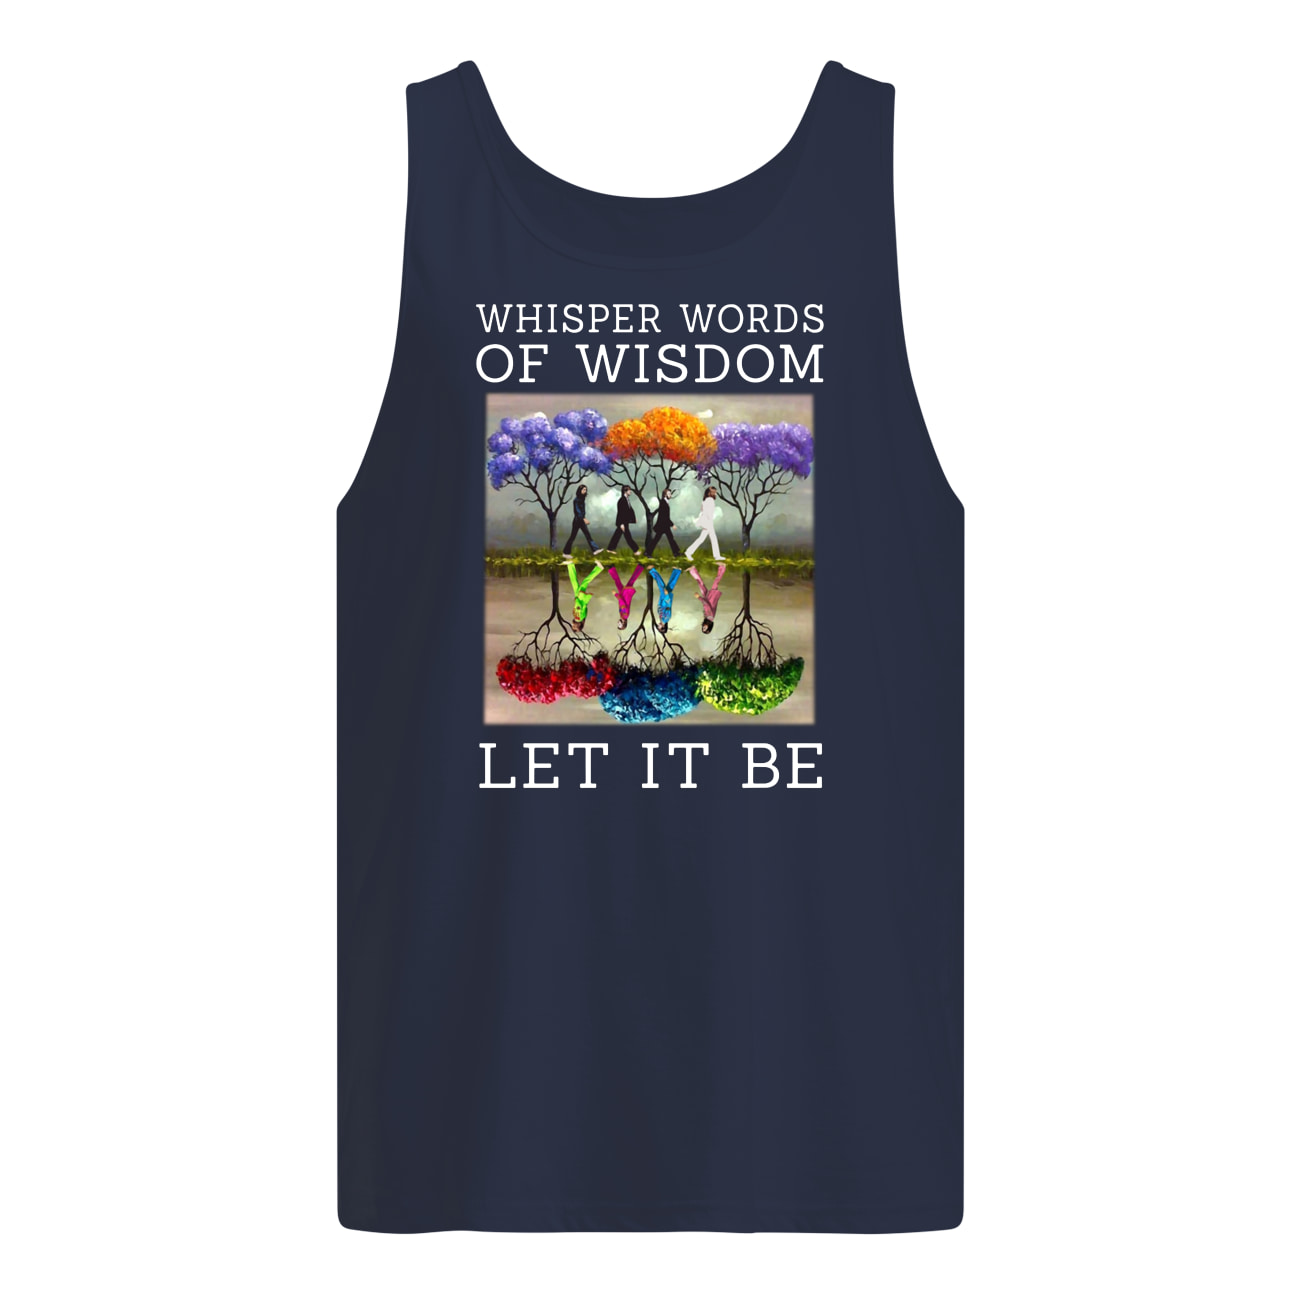 The beatle painting tree whisper words of wisdom let it be tank top